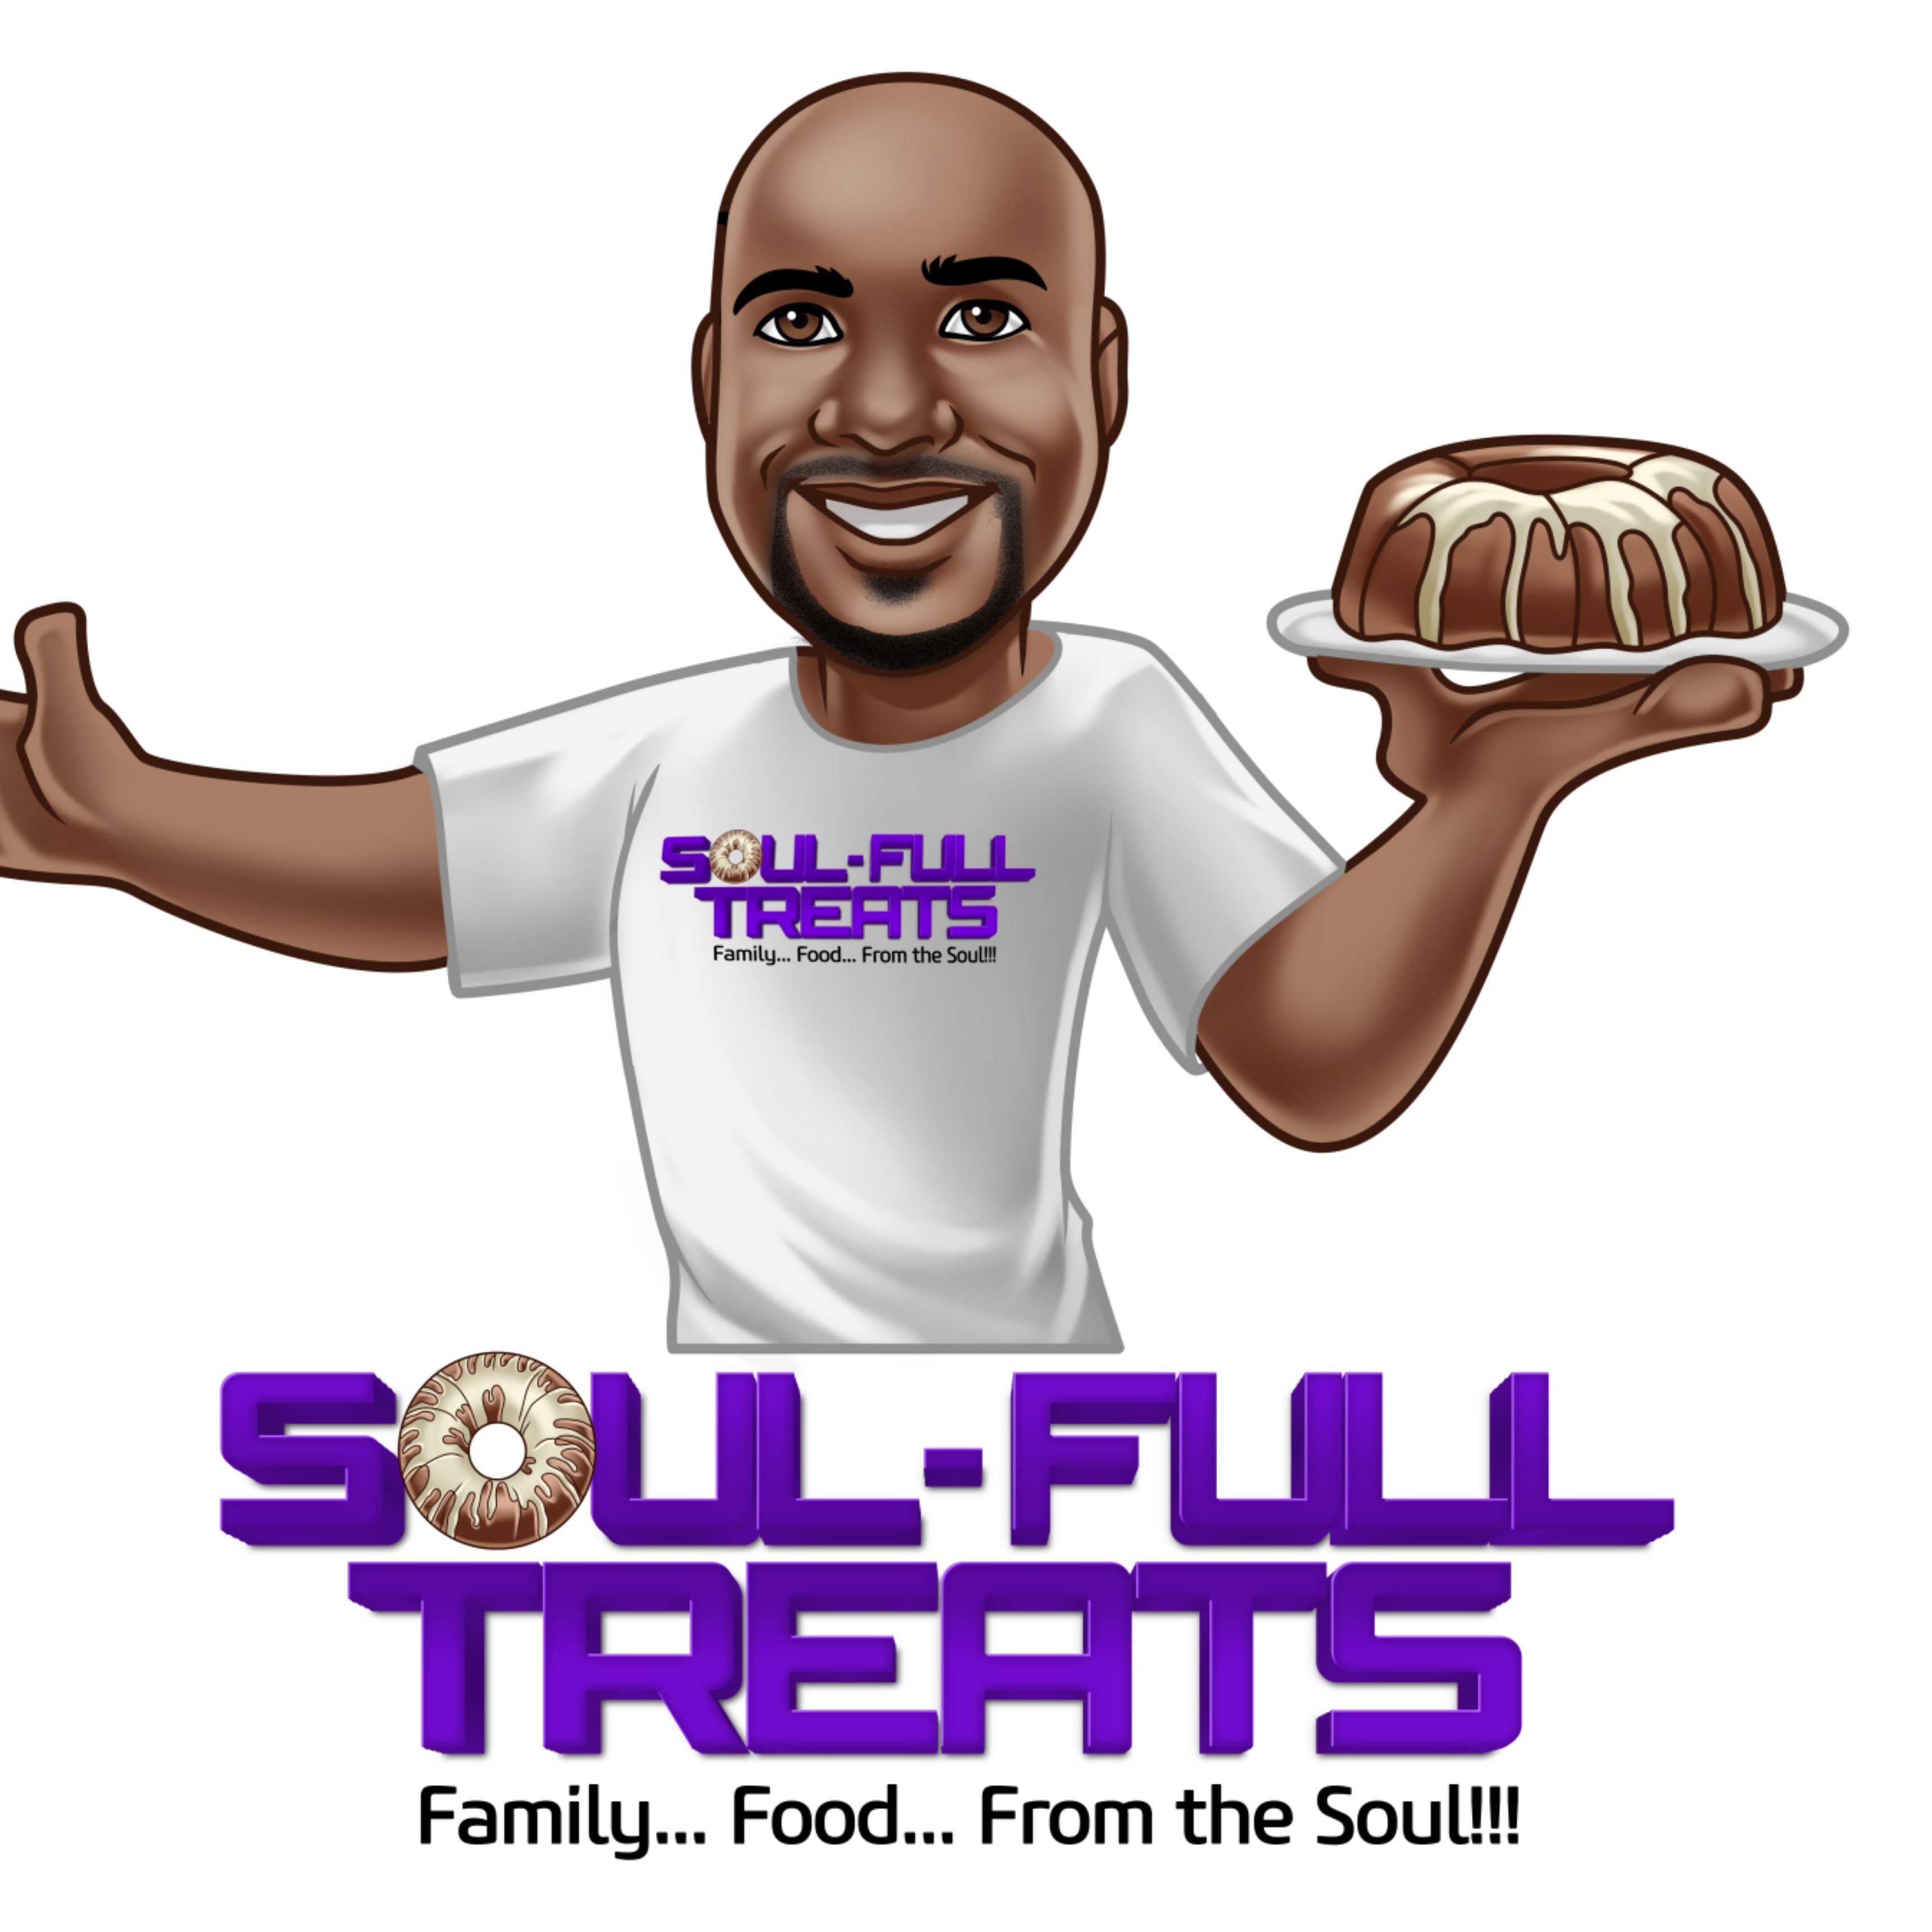 GOD'S LEADING...
ENTREPRENEUR...
OUR MOTTO: FAMILY... FOOD... FROM THE SOUL!!! SOUL-FULL TREATS brings you an array of flavored Pound Cakes!